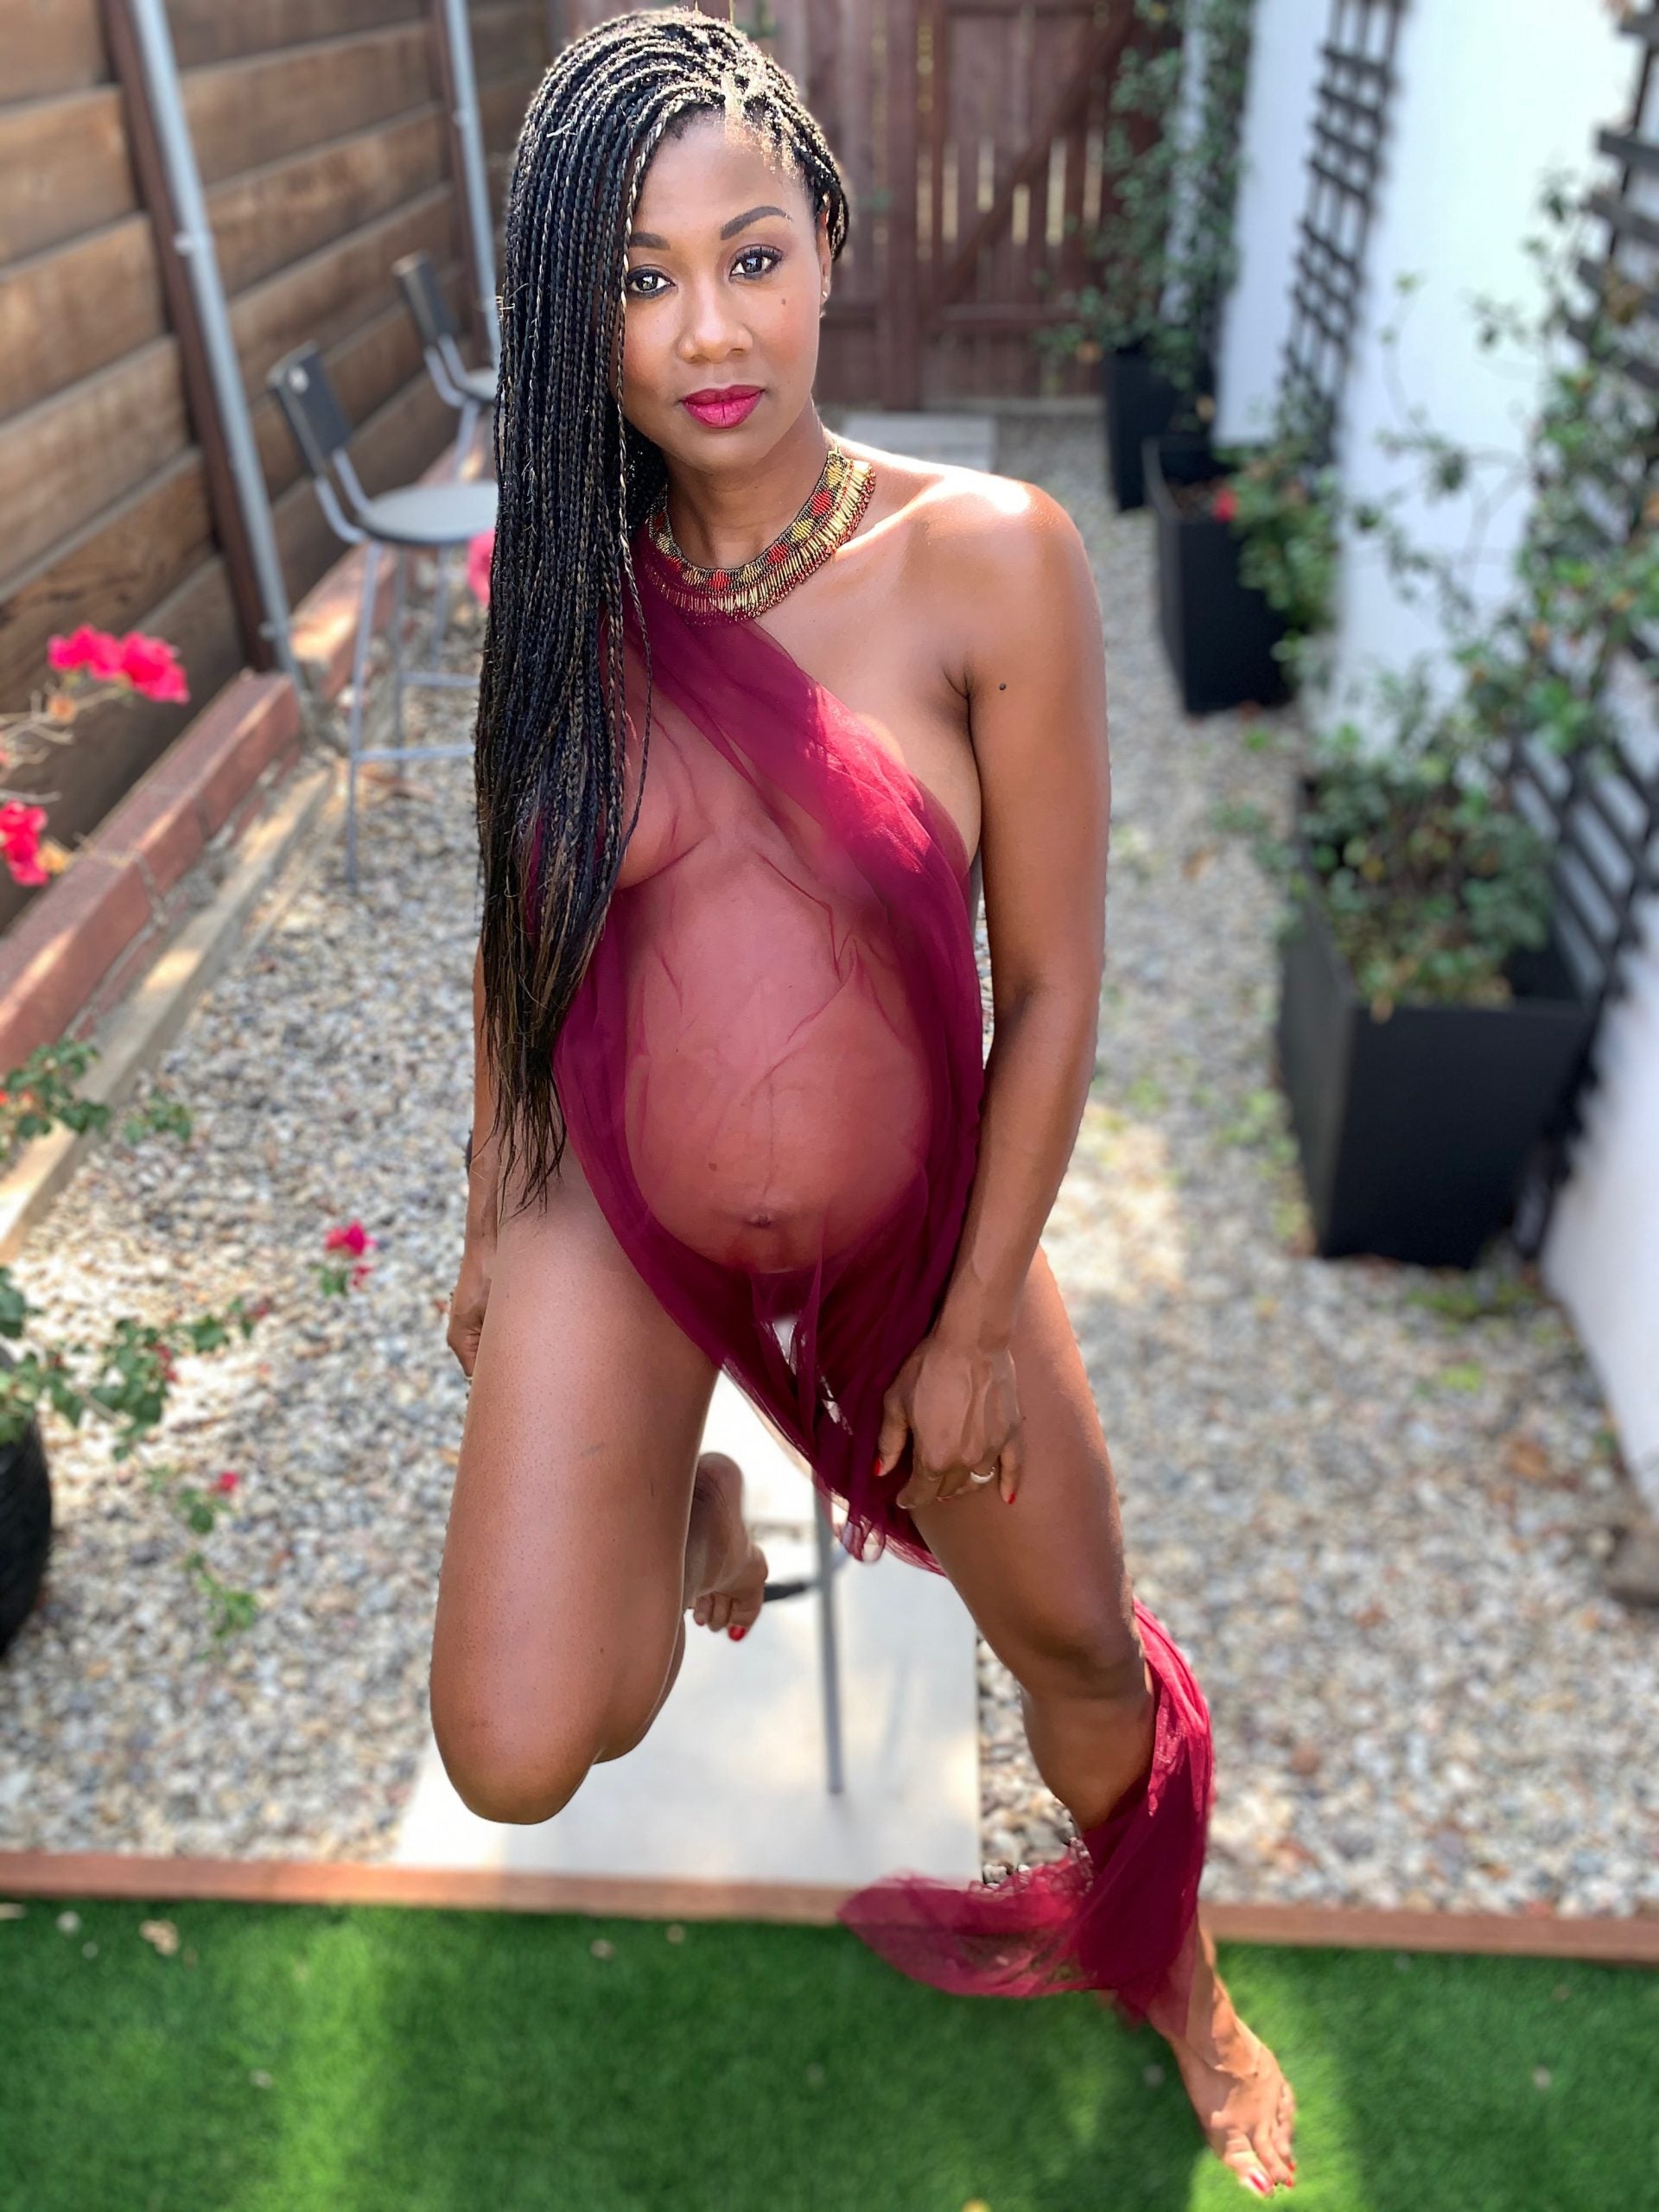 Actress Emayatzy Corinealdi Is Pregnant and Glowing: "It’s Such a Spiritual Experience"